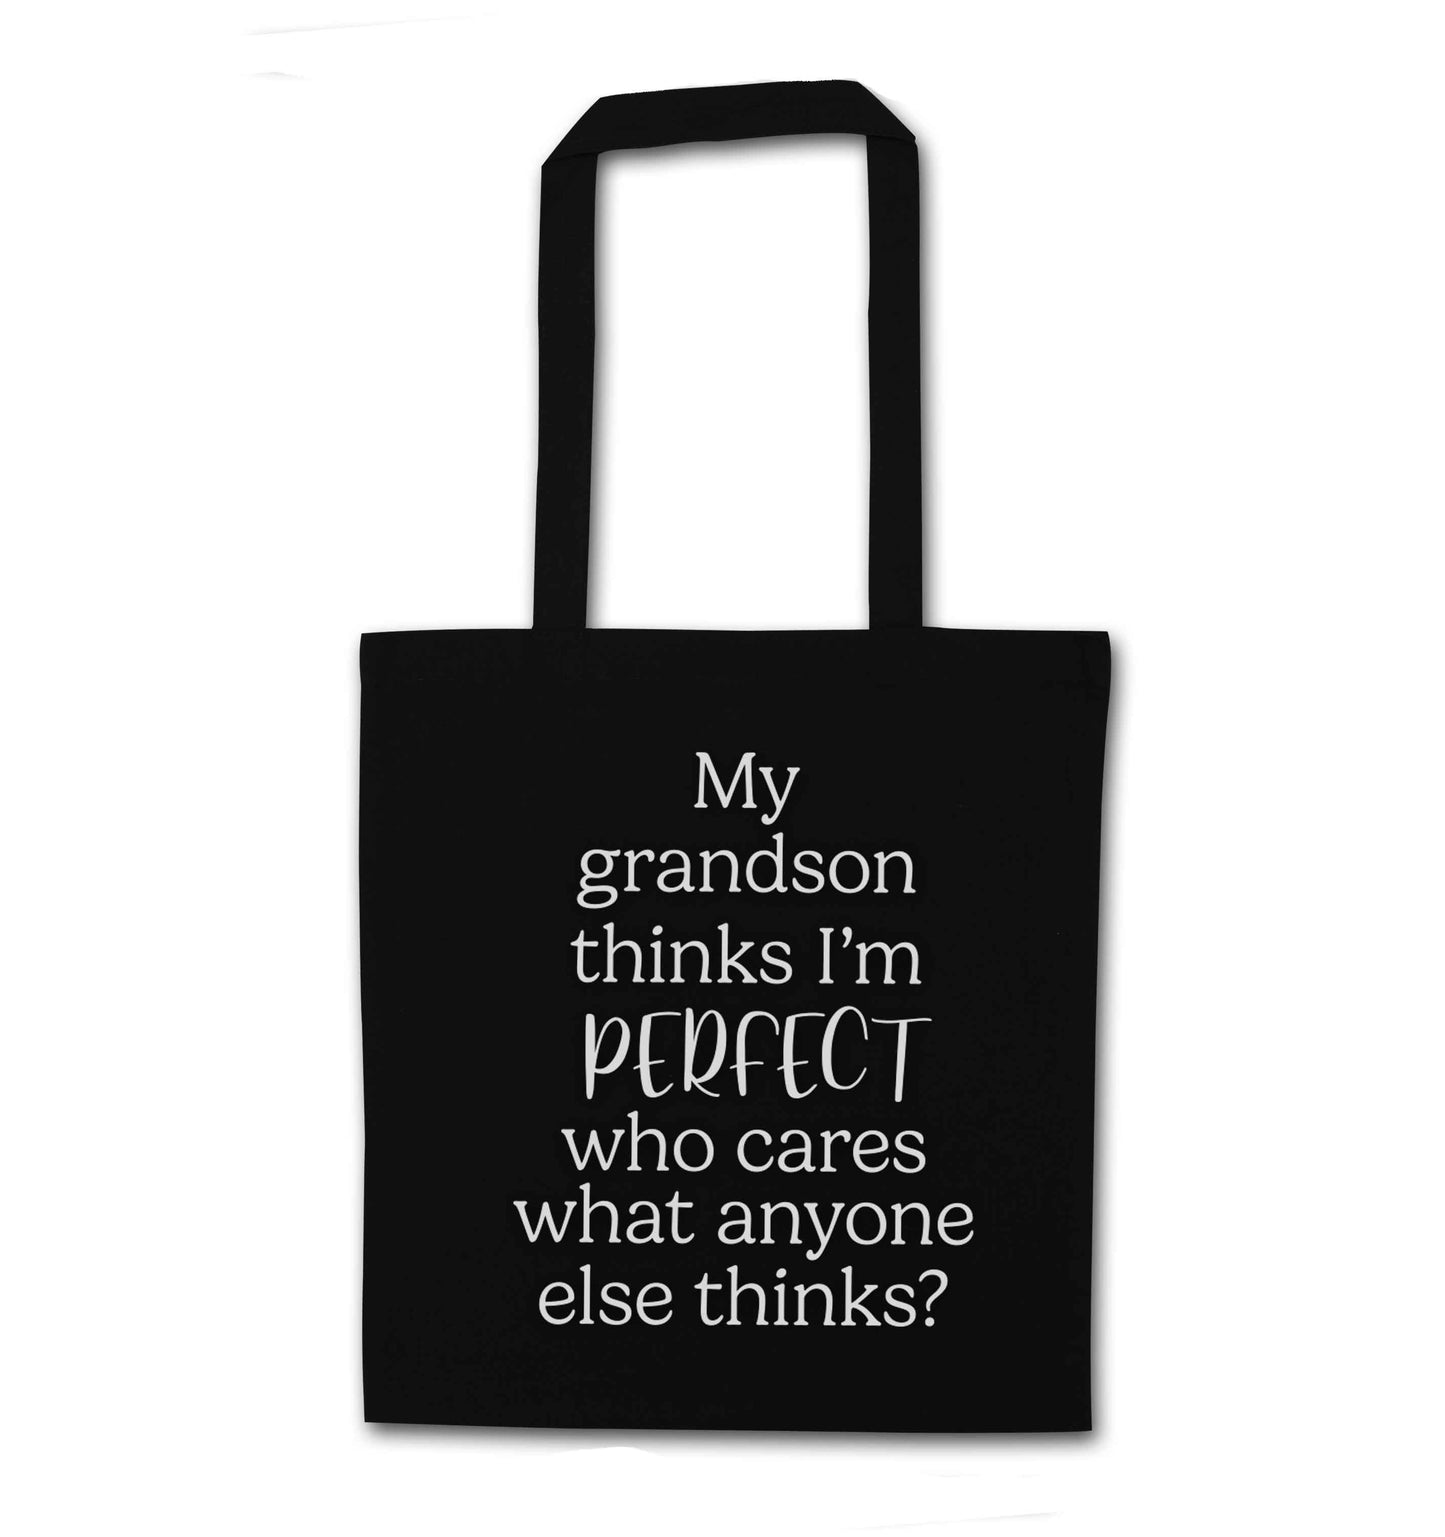 My Grandson thinks I'm perfect who cares what anyone else thinks? black tote bag